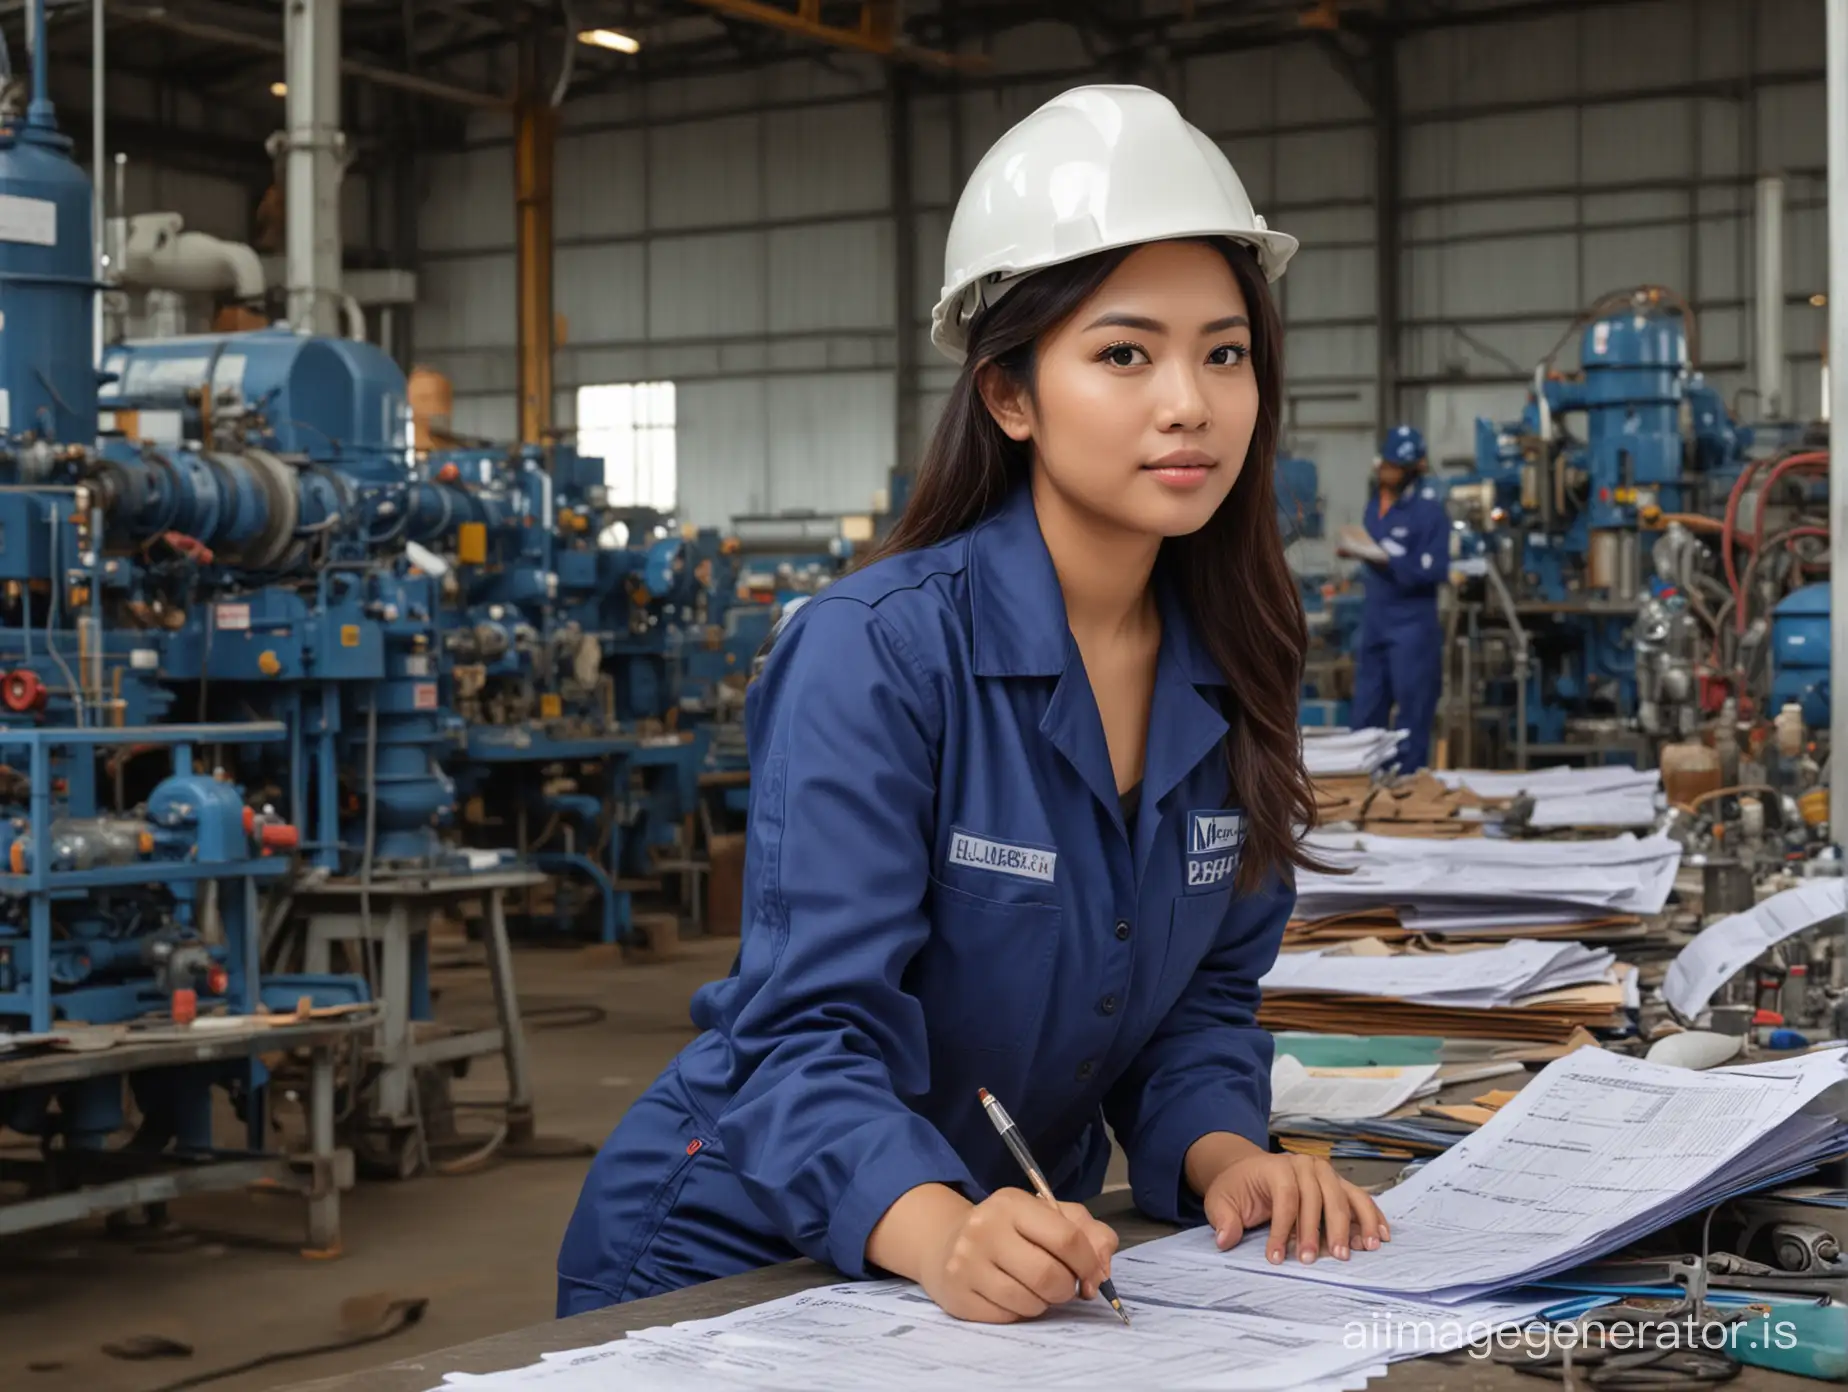 Curvy with cleavage showing Indonesian Engineer women busy working at her desk wearing blue coverall With reflectors. Her table if messy with documents, her background scene is oil and gas plant.